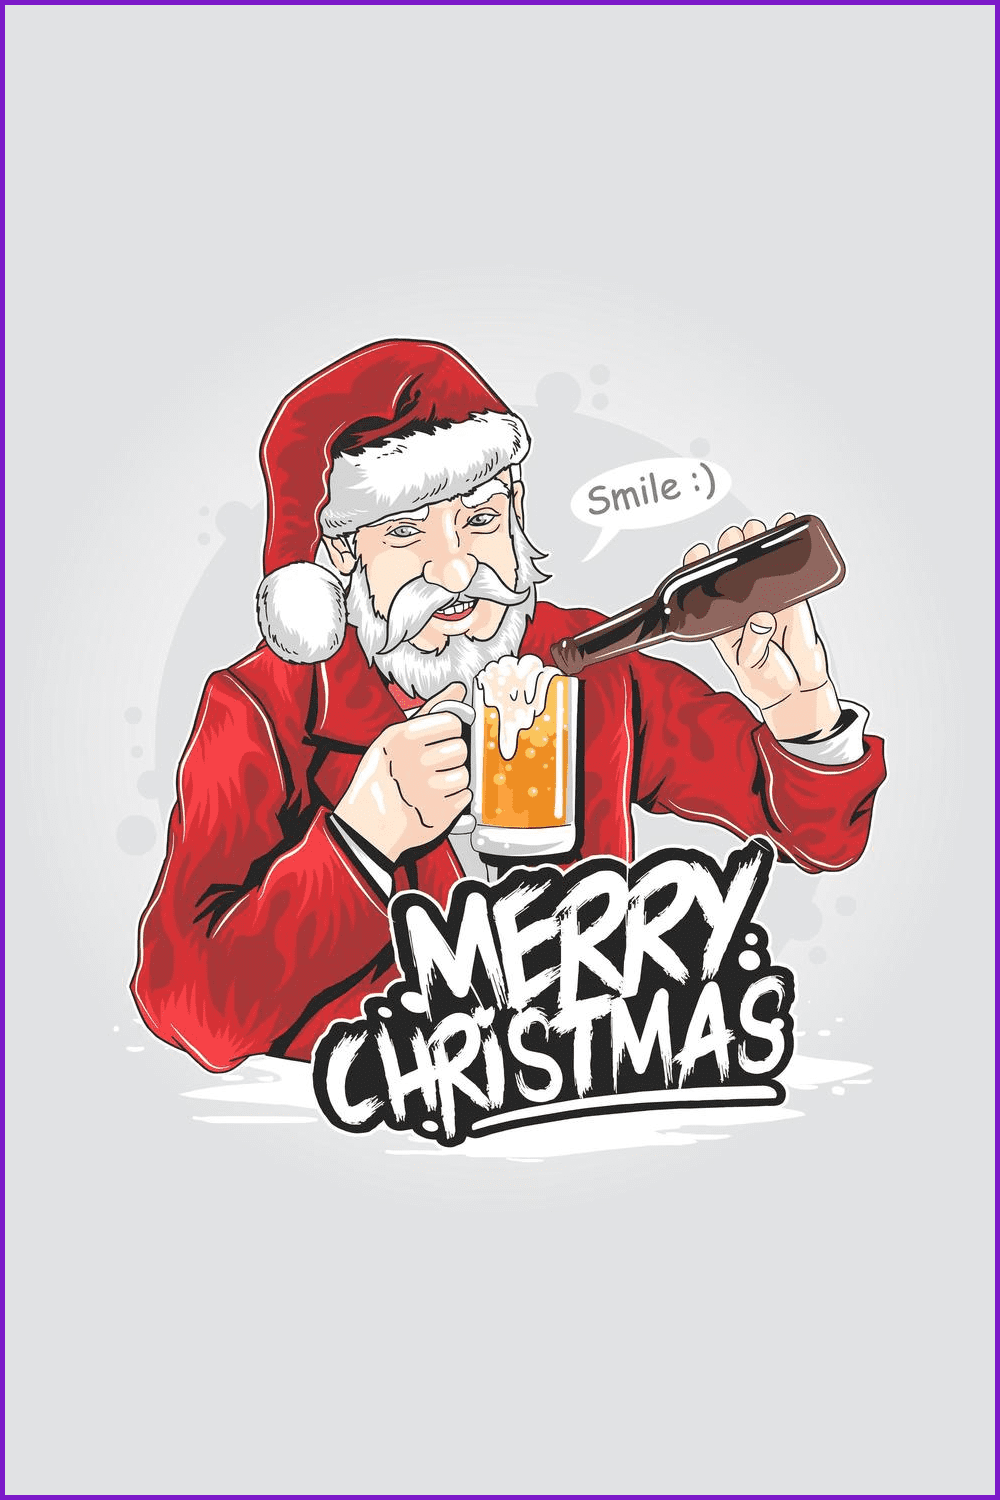 Santa Claus is drinking a beer.